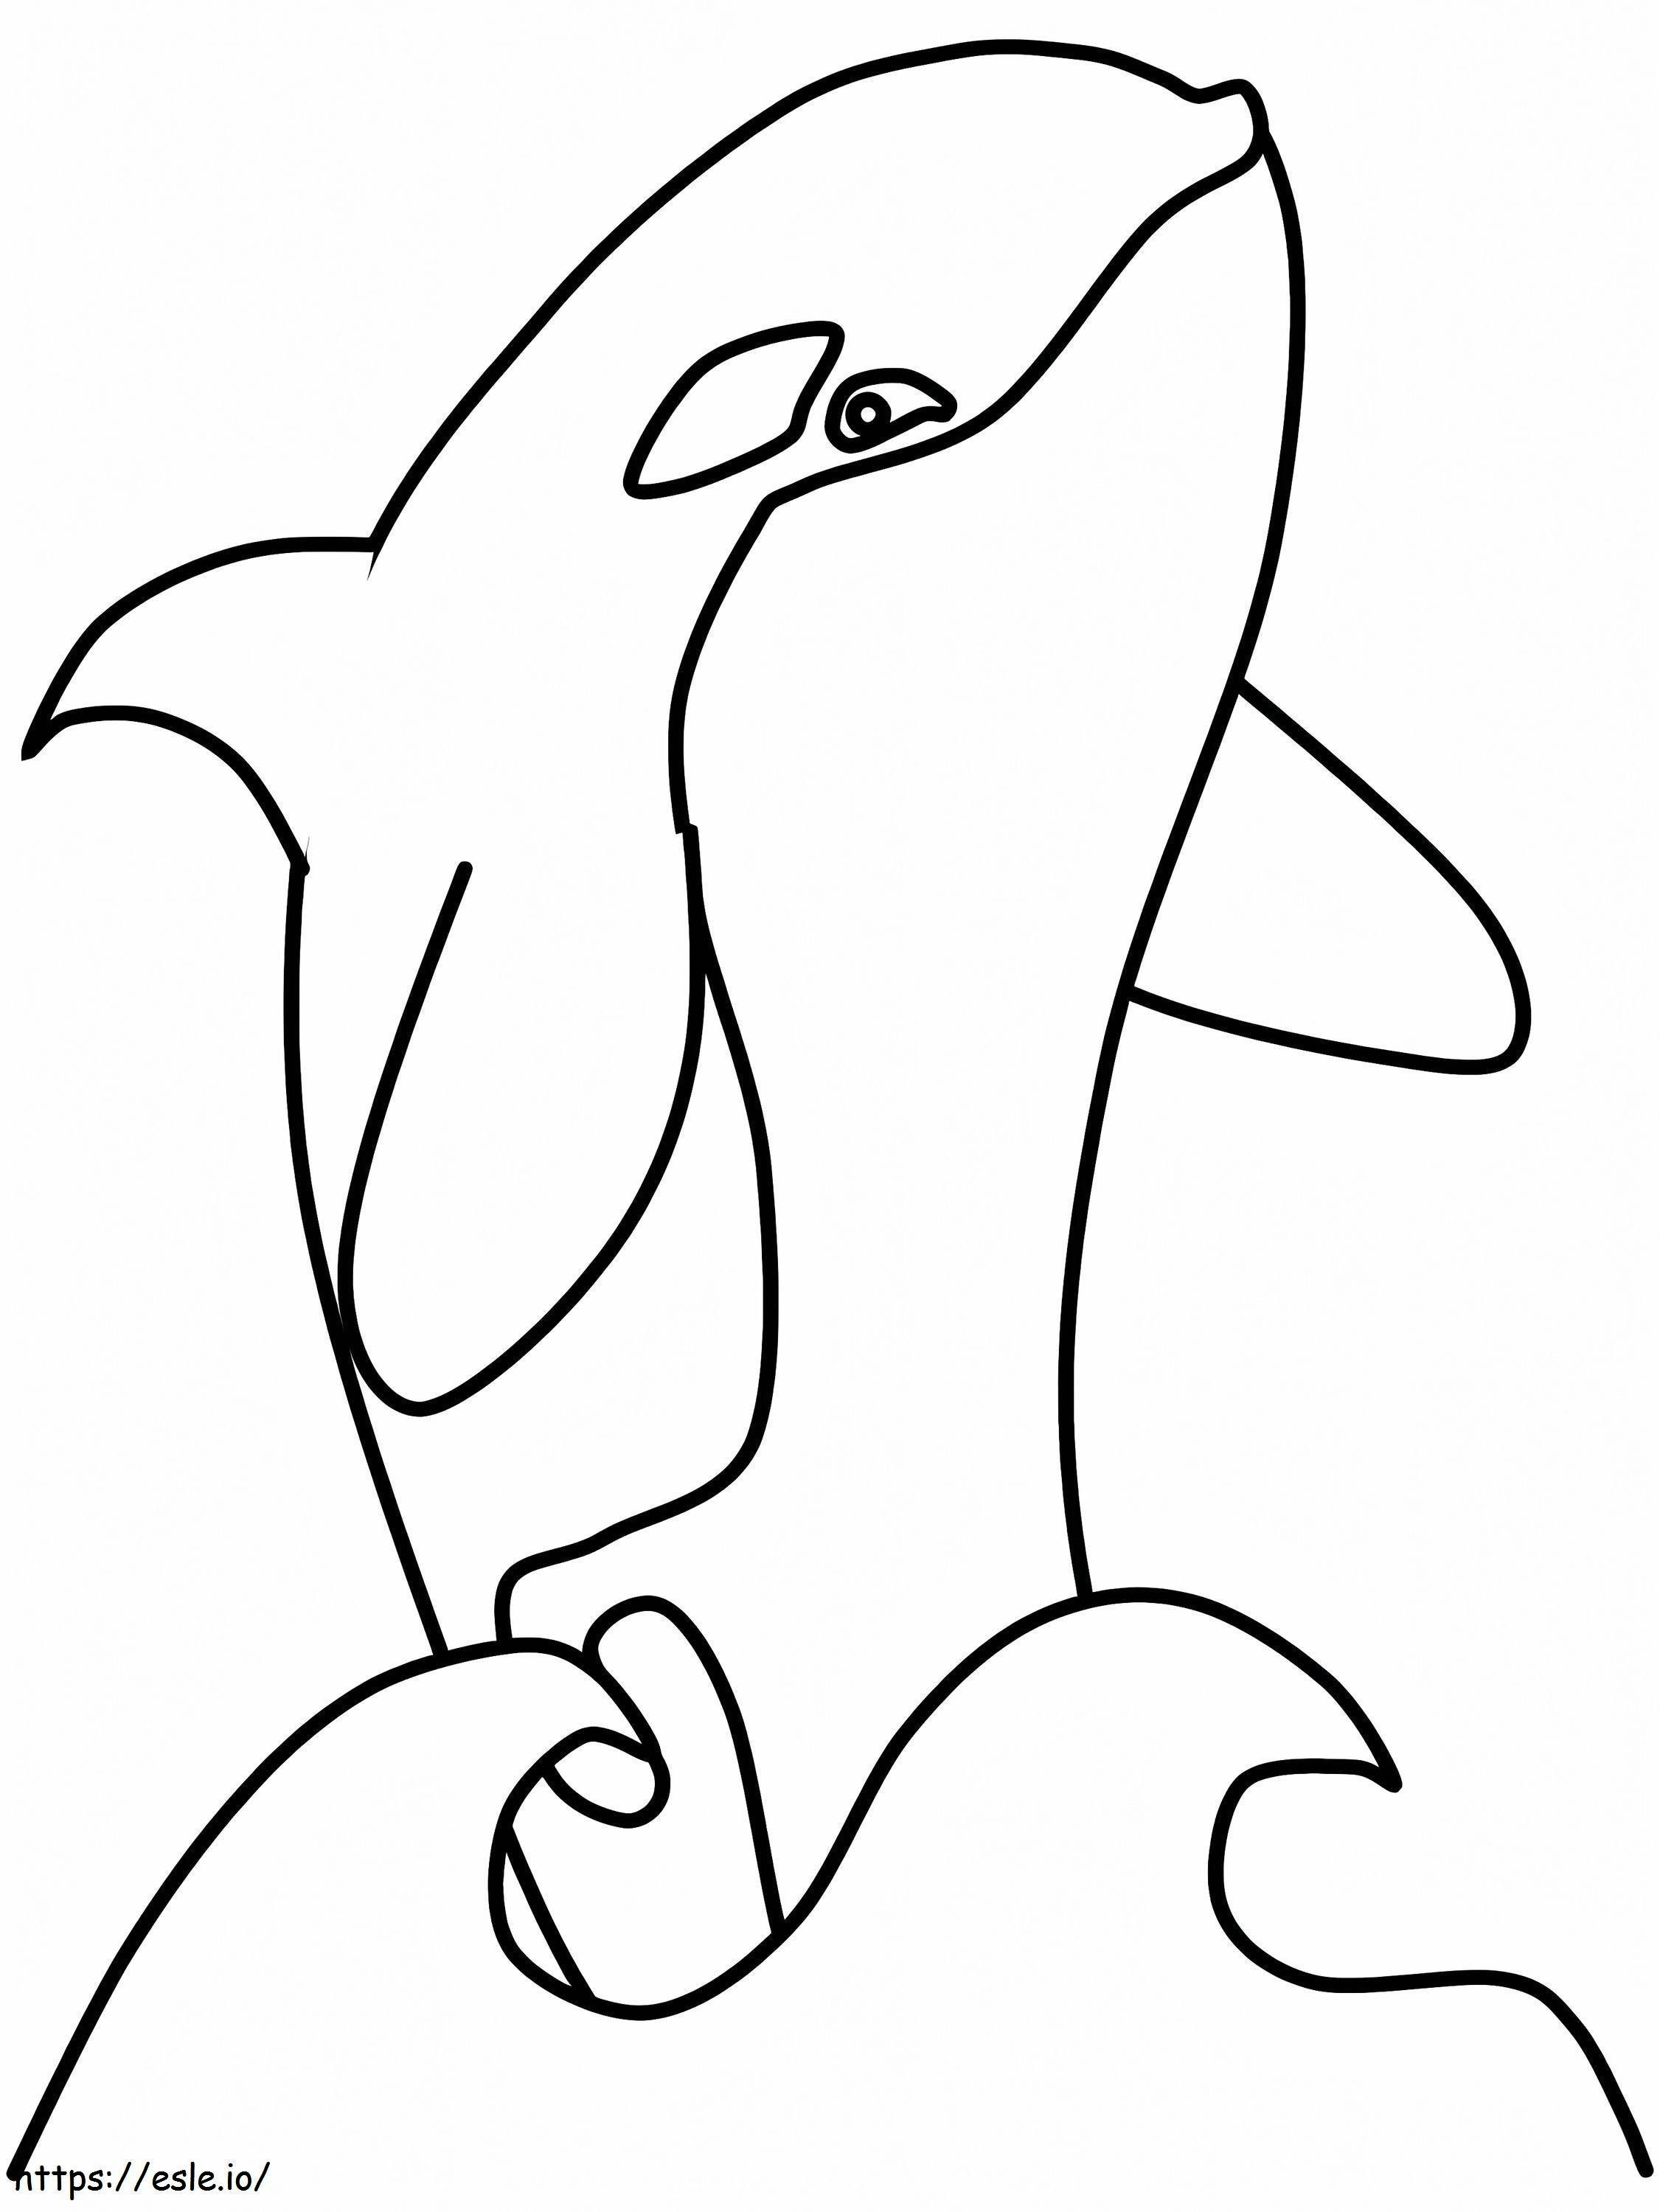 Print Orca Whale coloring page